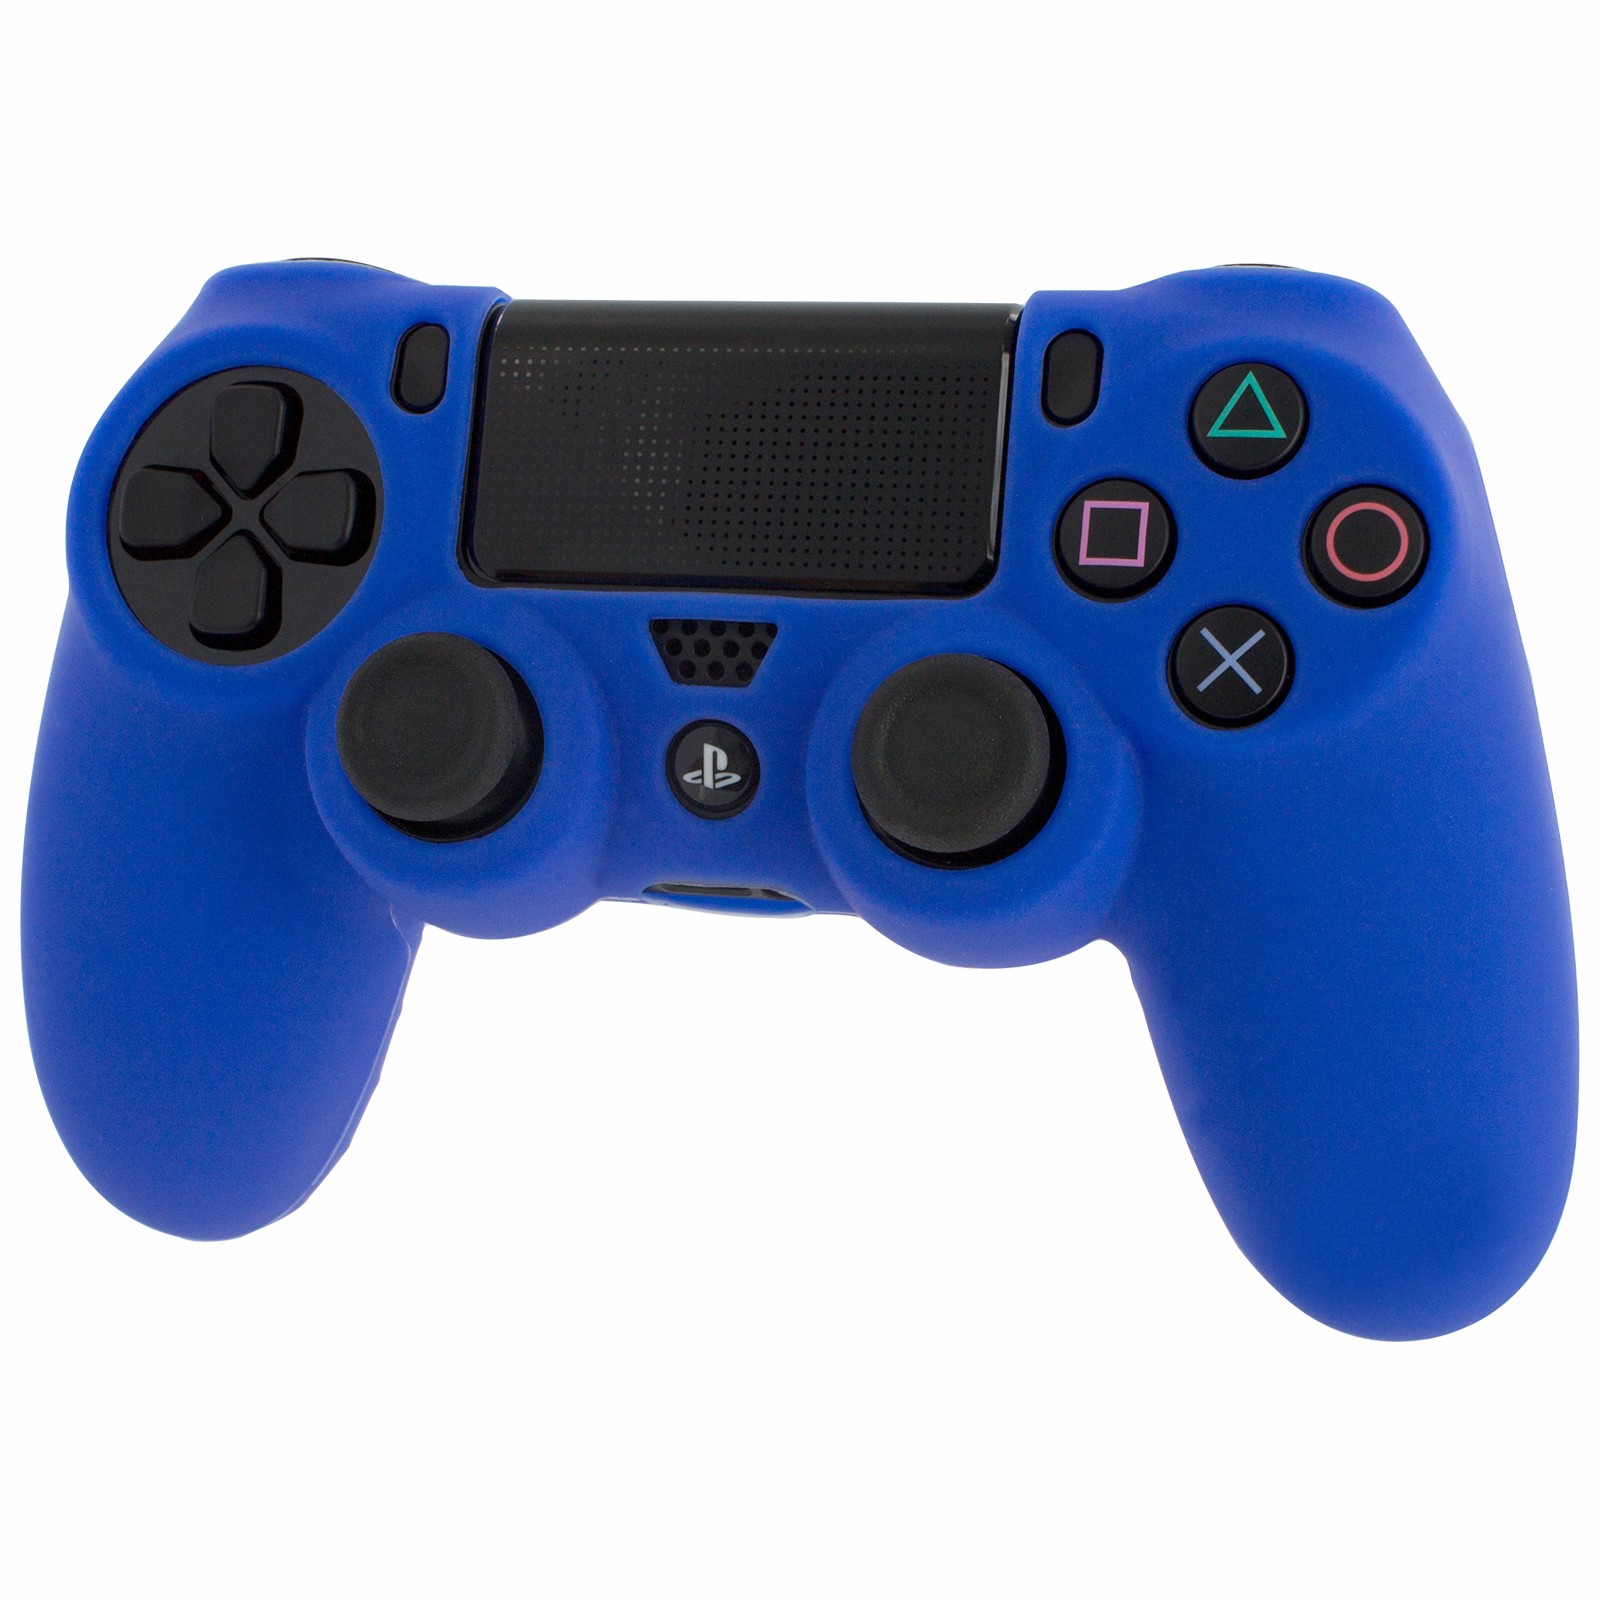 Kop Zedlabz Soft Silicone Rubber Skin Grip Cover For Sony Ps4 Controller With Ribbed Handle Blue